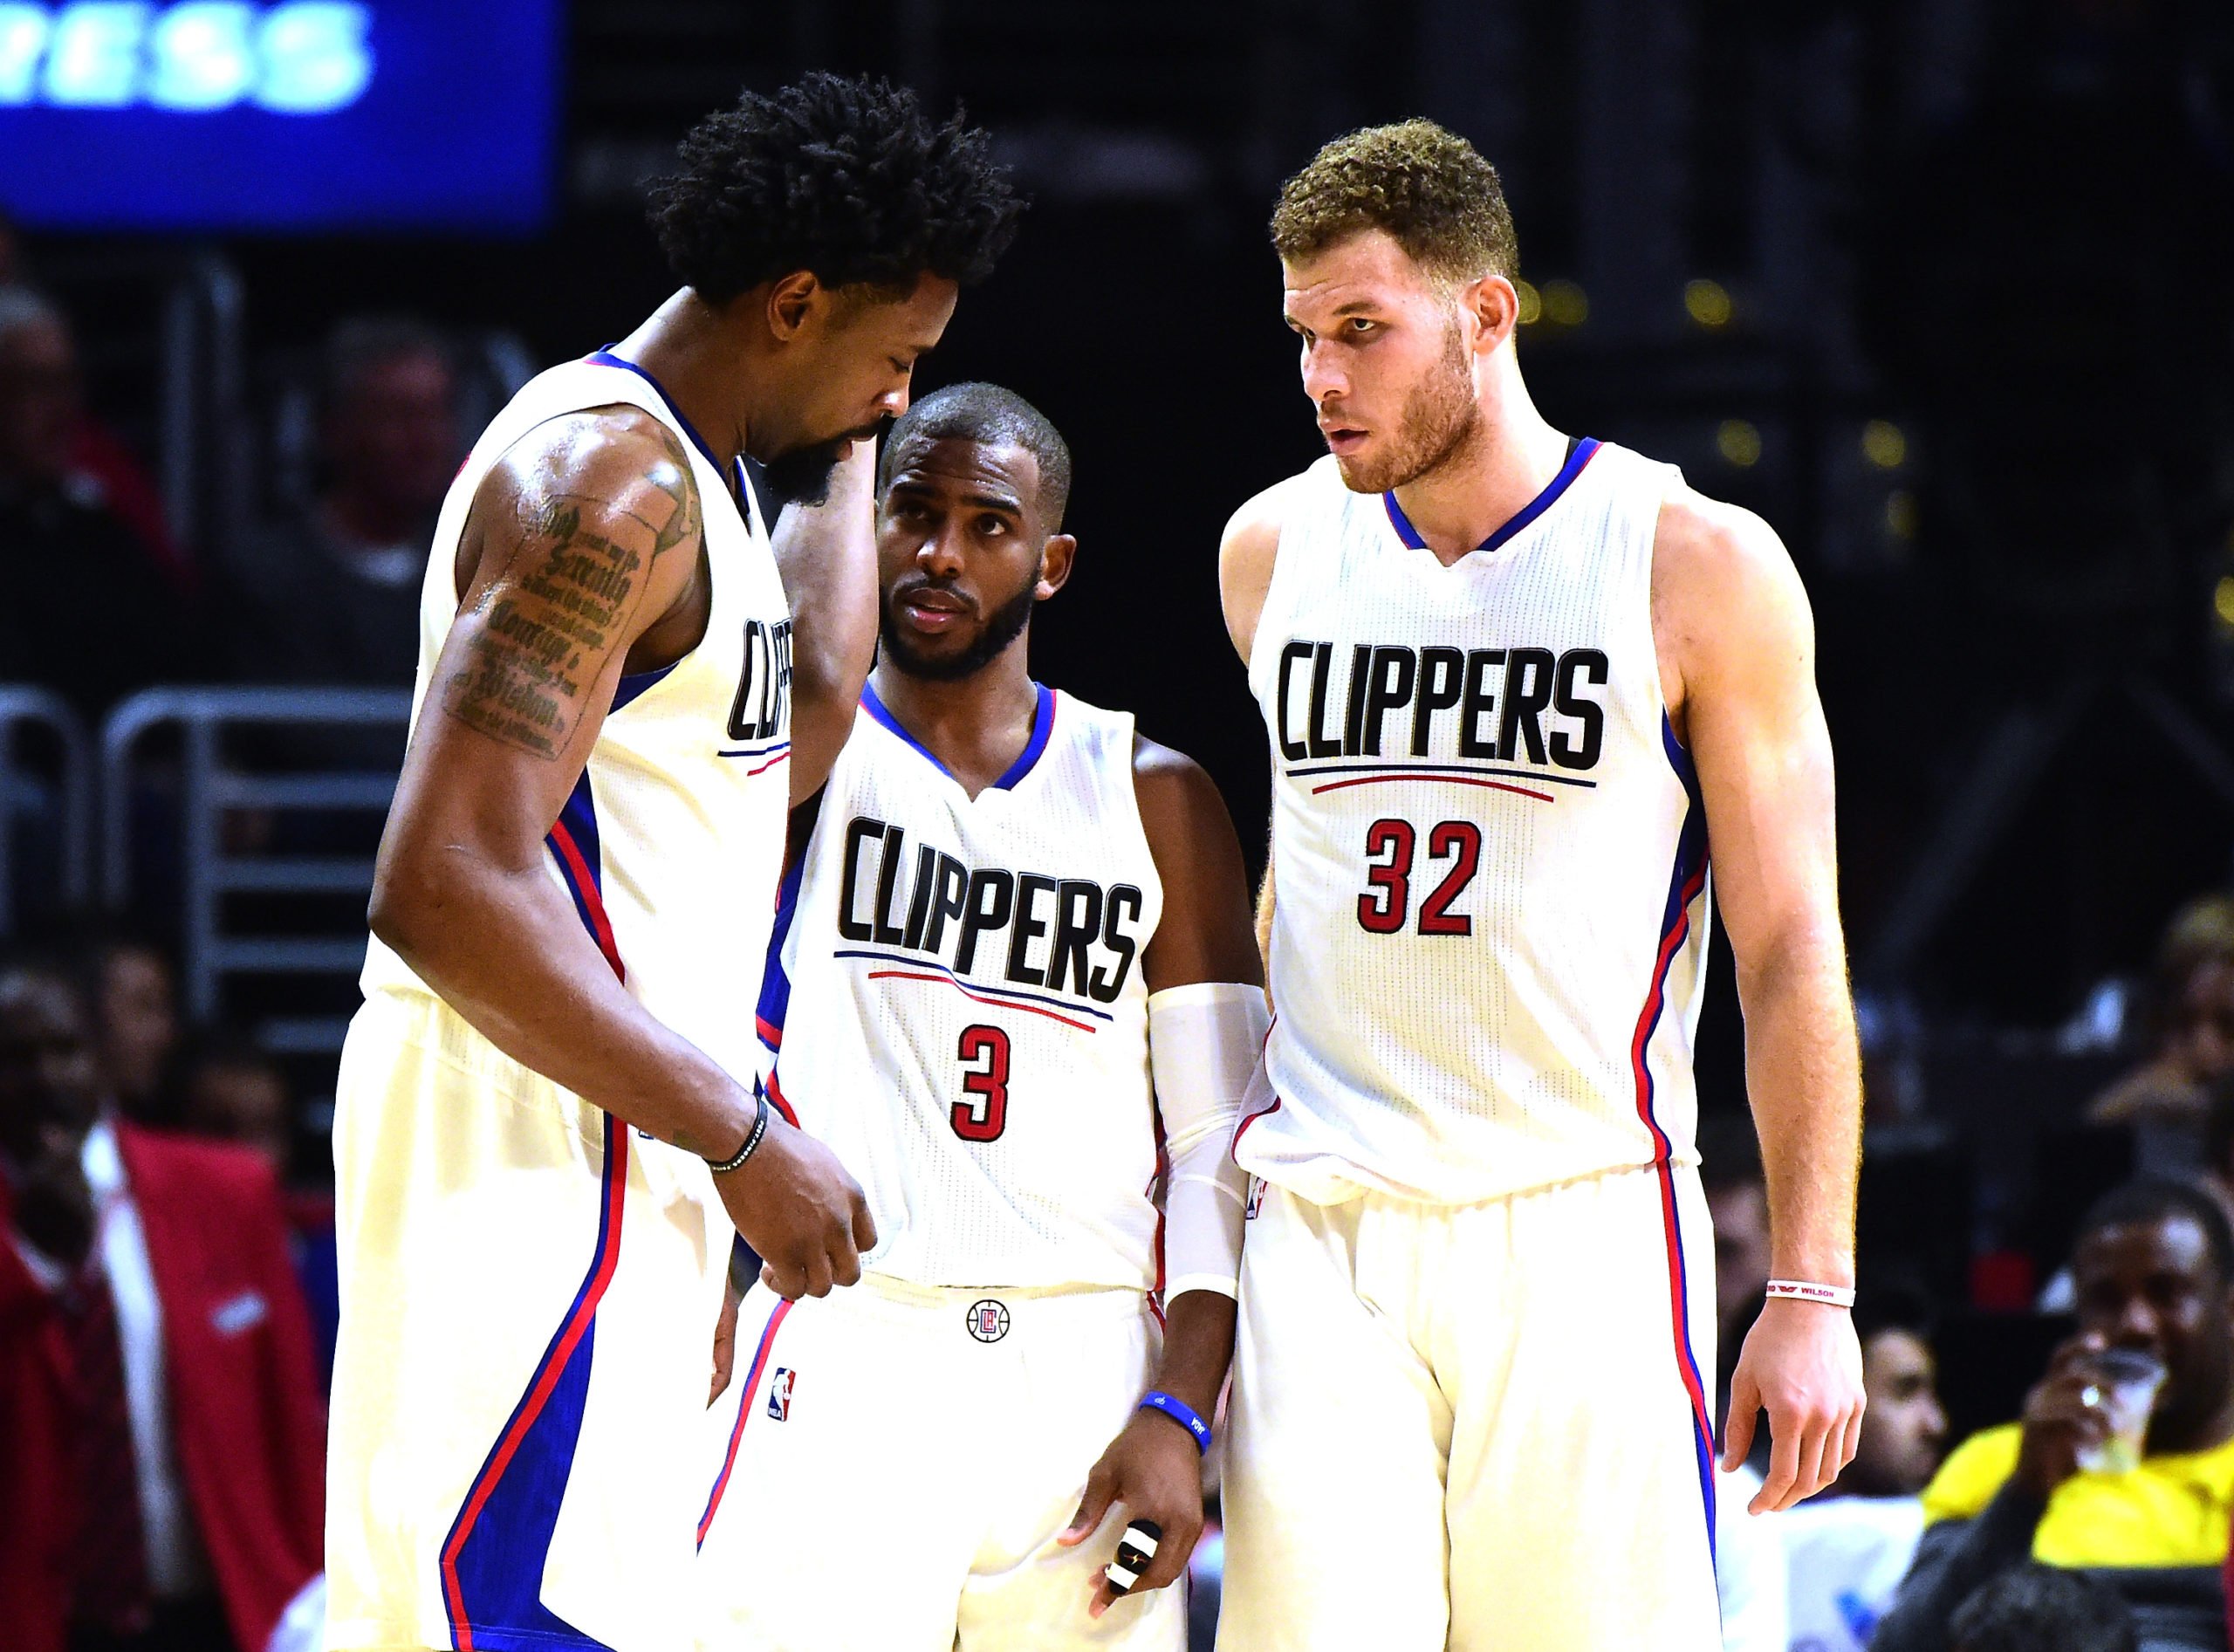 LOS ANGELES, CA - DECEMBER 21: DeAndre Jordan #6, Chris Paul #3 and Blake Griffin #32 of the Los Angeles Clippers gather during the game against the Oklahoma City Thunder at Staples Center on December 21, 2015 in Los Angeles, California. Harry How/Getty Images